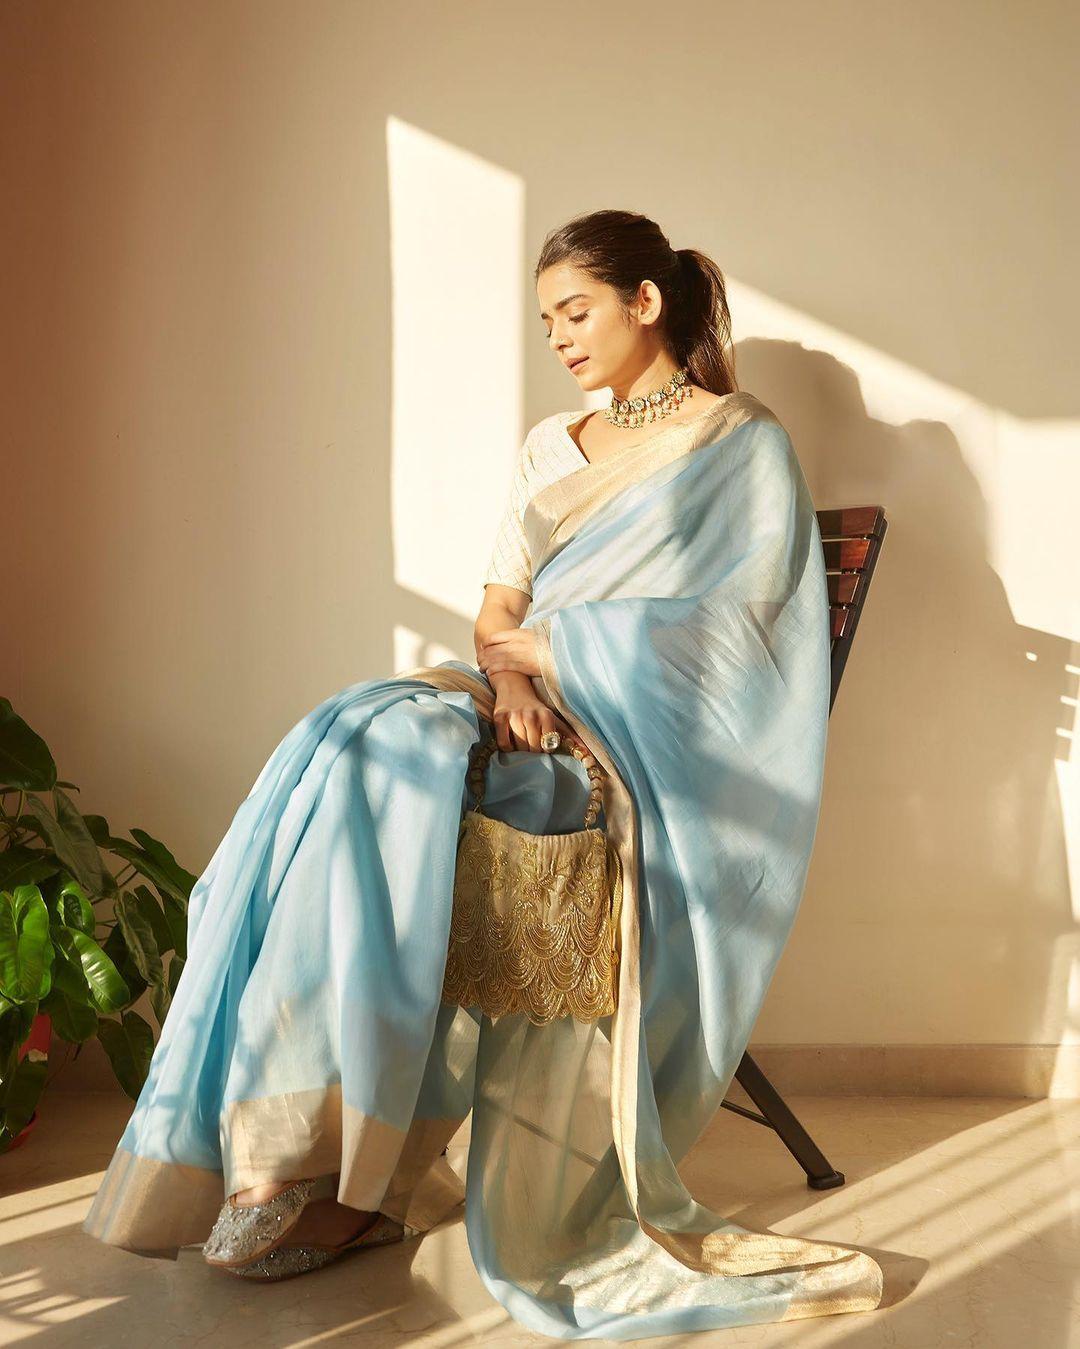 Mithila Palkar stuns in a vibrant blue saree, perfect for any occasion. Whether it's a family gathering or a friend's wedding, this look guarantees praises